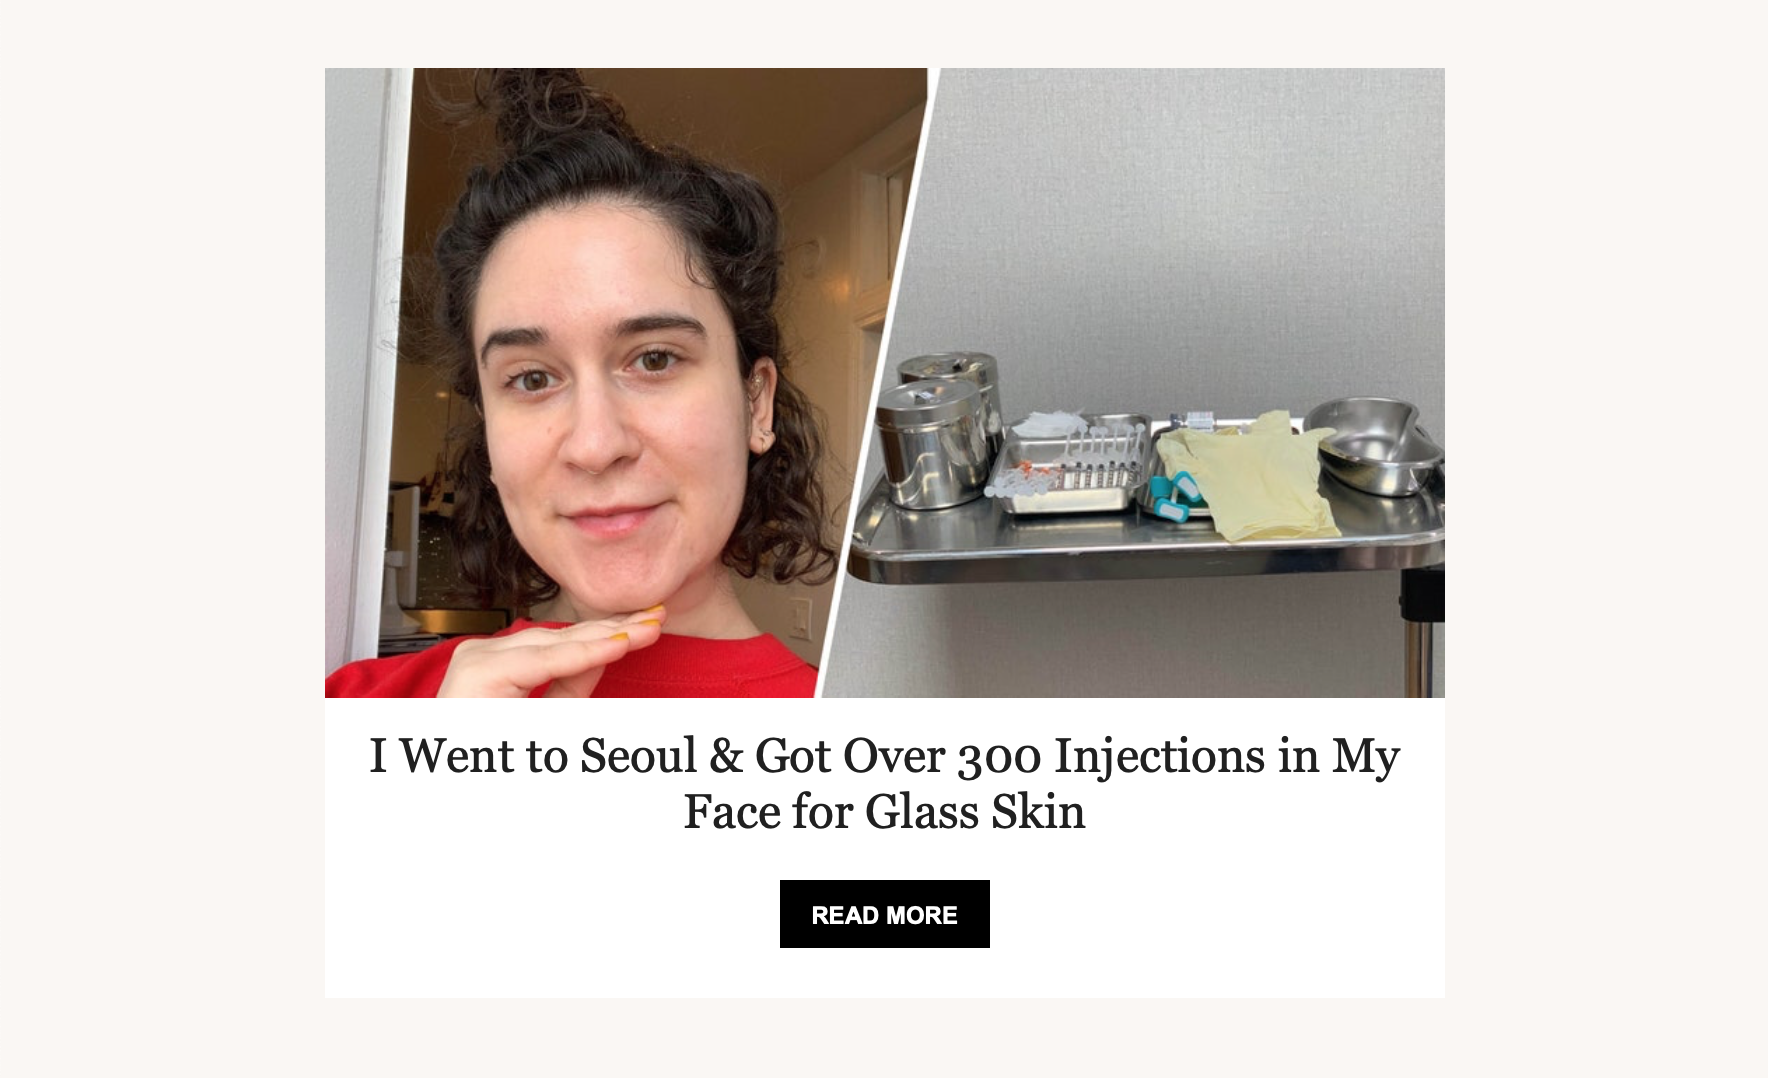 I Went to Seoul & Got Over 300 Injections in My Face for Glass Skin